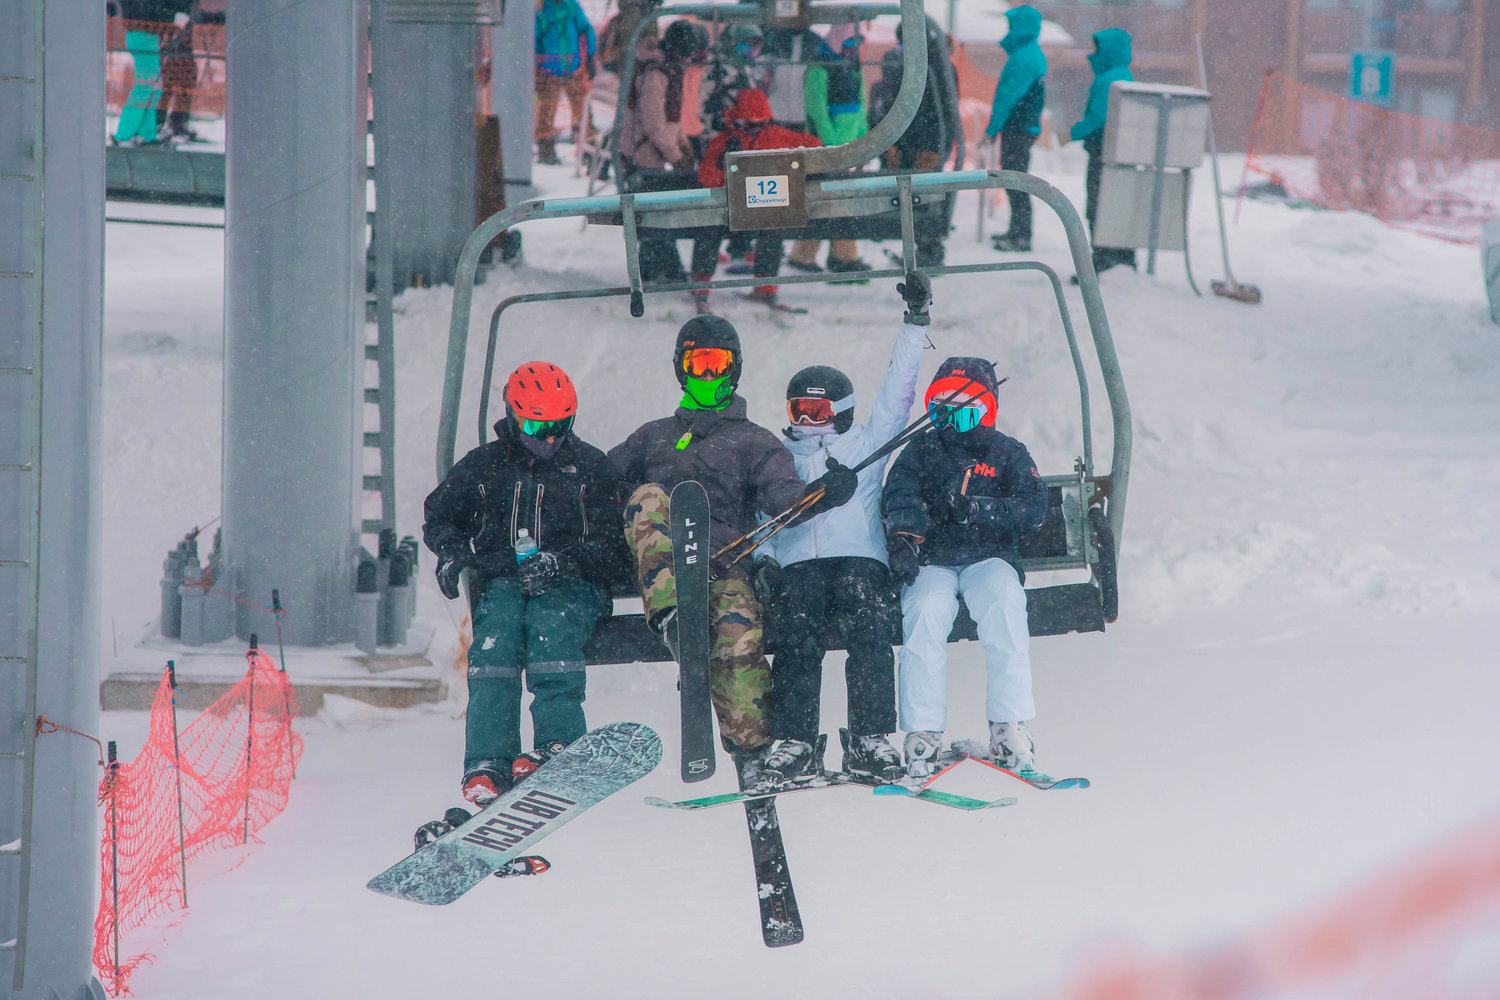 Skiers and snowboarders ride ‘The Great White Express’ at White Pass on Sunday.